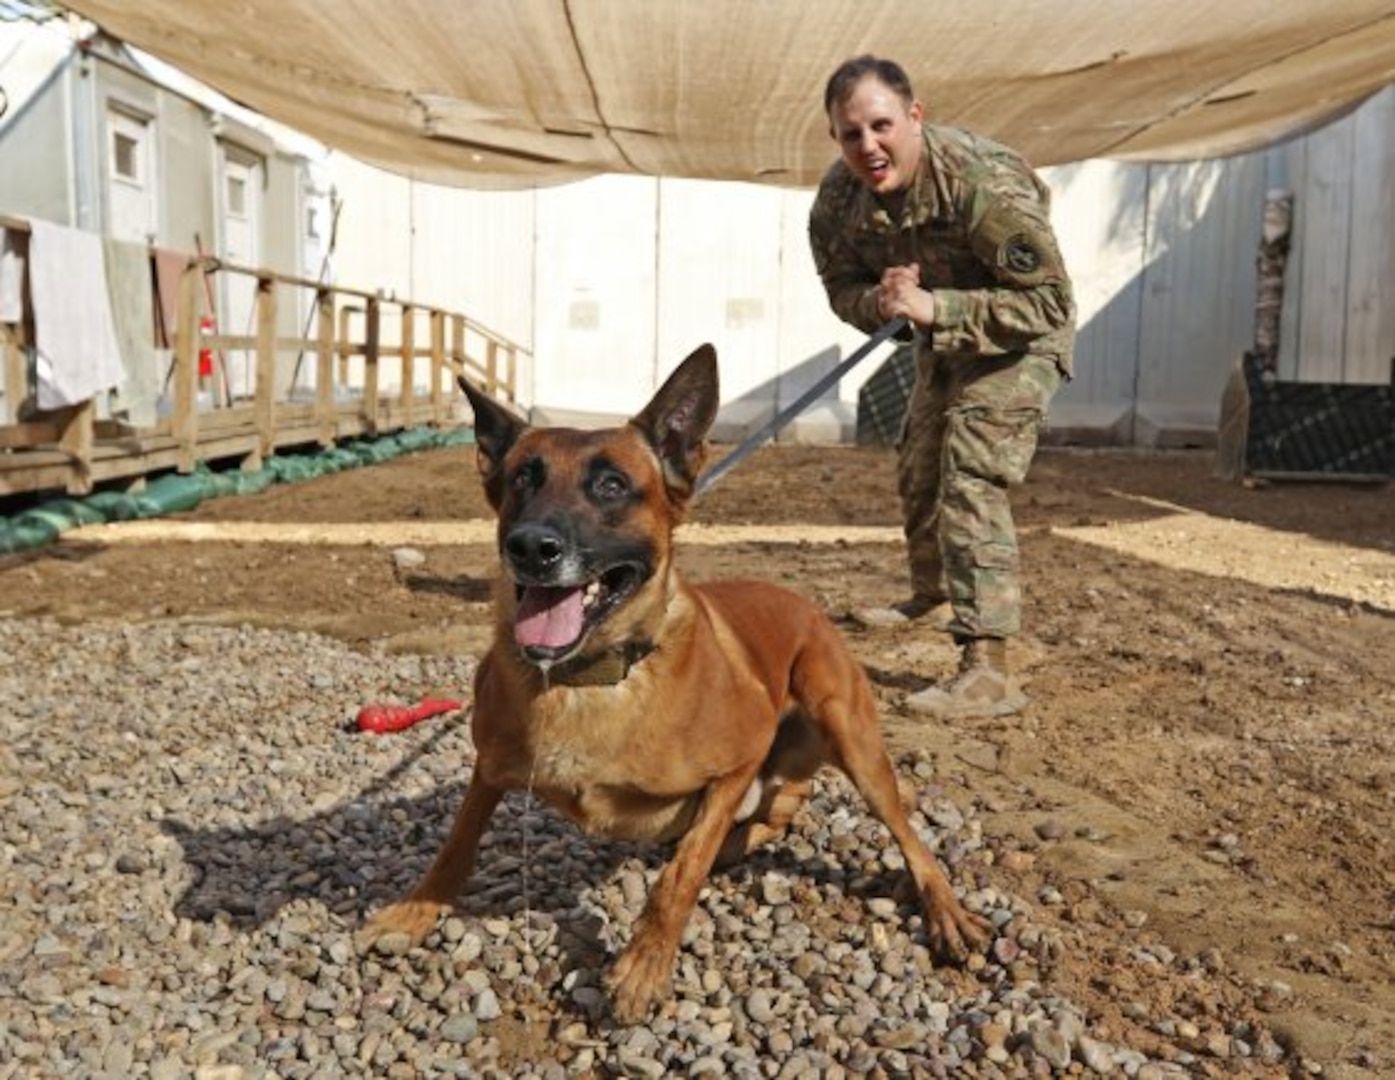 Rrobiek, a Belgian Malinois military working dog, and his handler, U.S. Army Staff Sgt. Charles Ogin, 3rd Infantry Regiment, practice bite training after work Feb. 14 in Baghdad, Iraq. Rrobiek is a patrol and explosive detector dog who works hard with Ogin to ensure the safety of everyone inside the entry point gate at Union III in Baghdad. (Photo Credit: U.S. Army photo by Sgt. Anna Pongo)